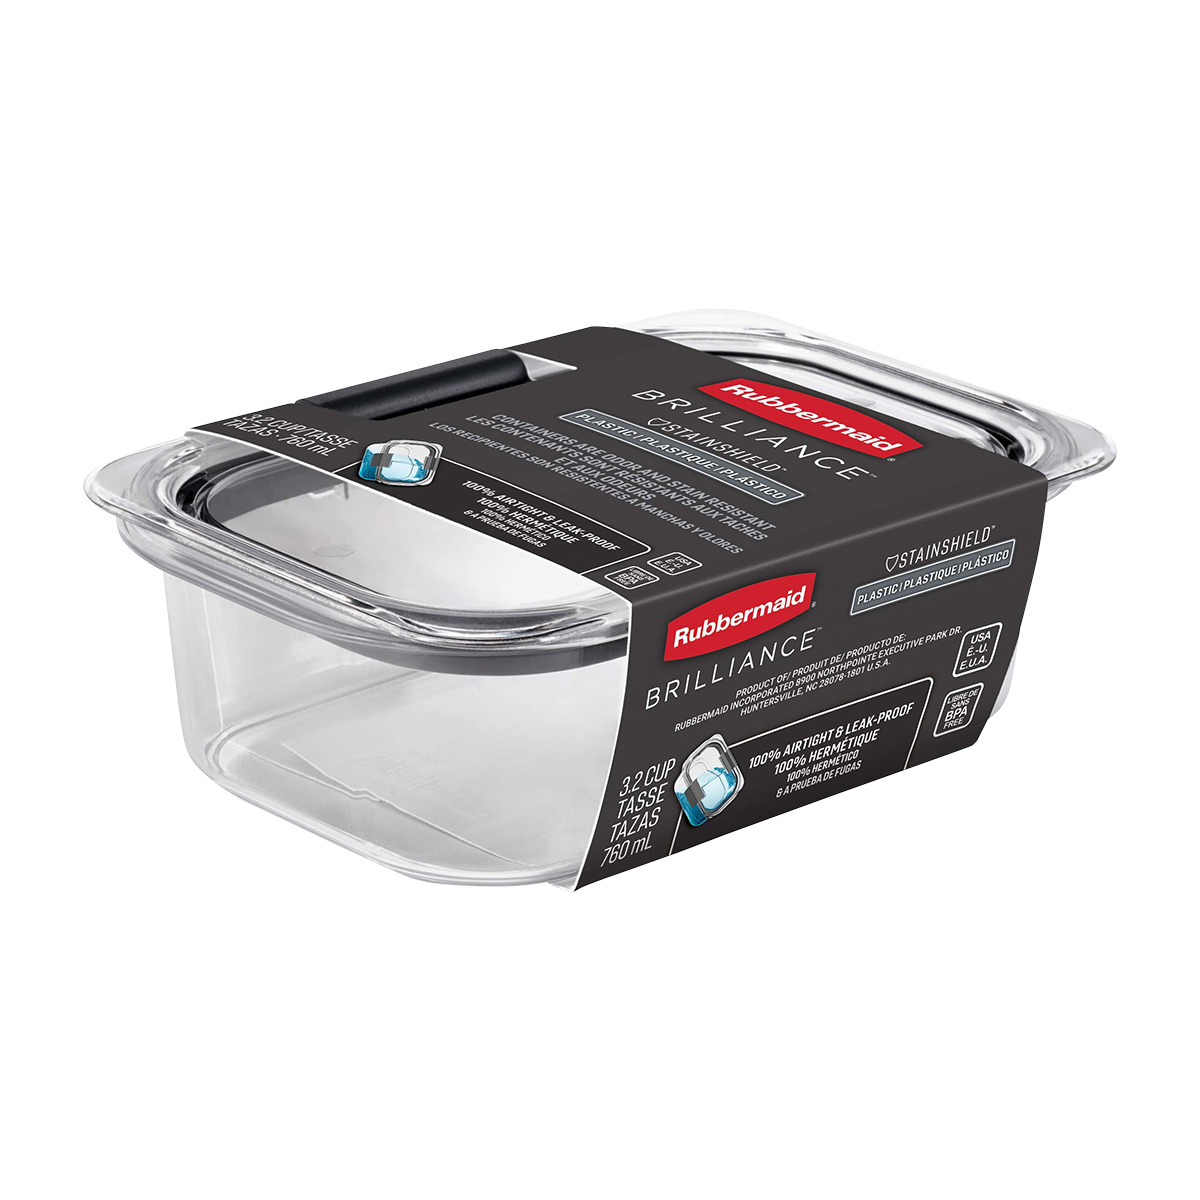 Rubbermaid Brilliance 3.2 Cup Food Container with Airtight & Leak-Proof Lid